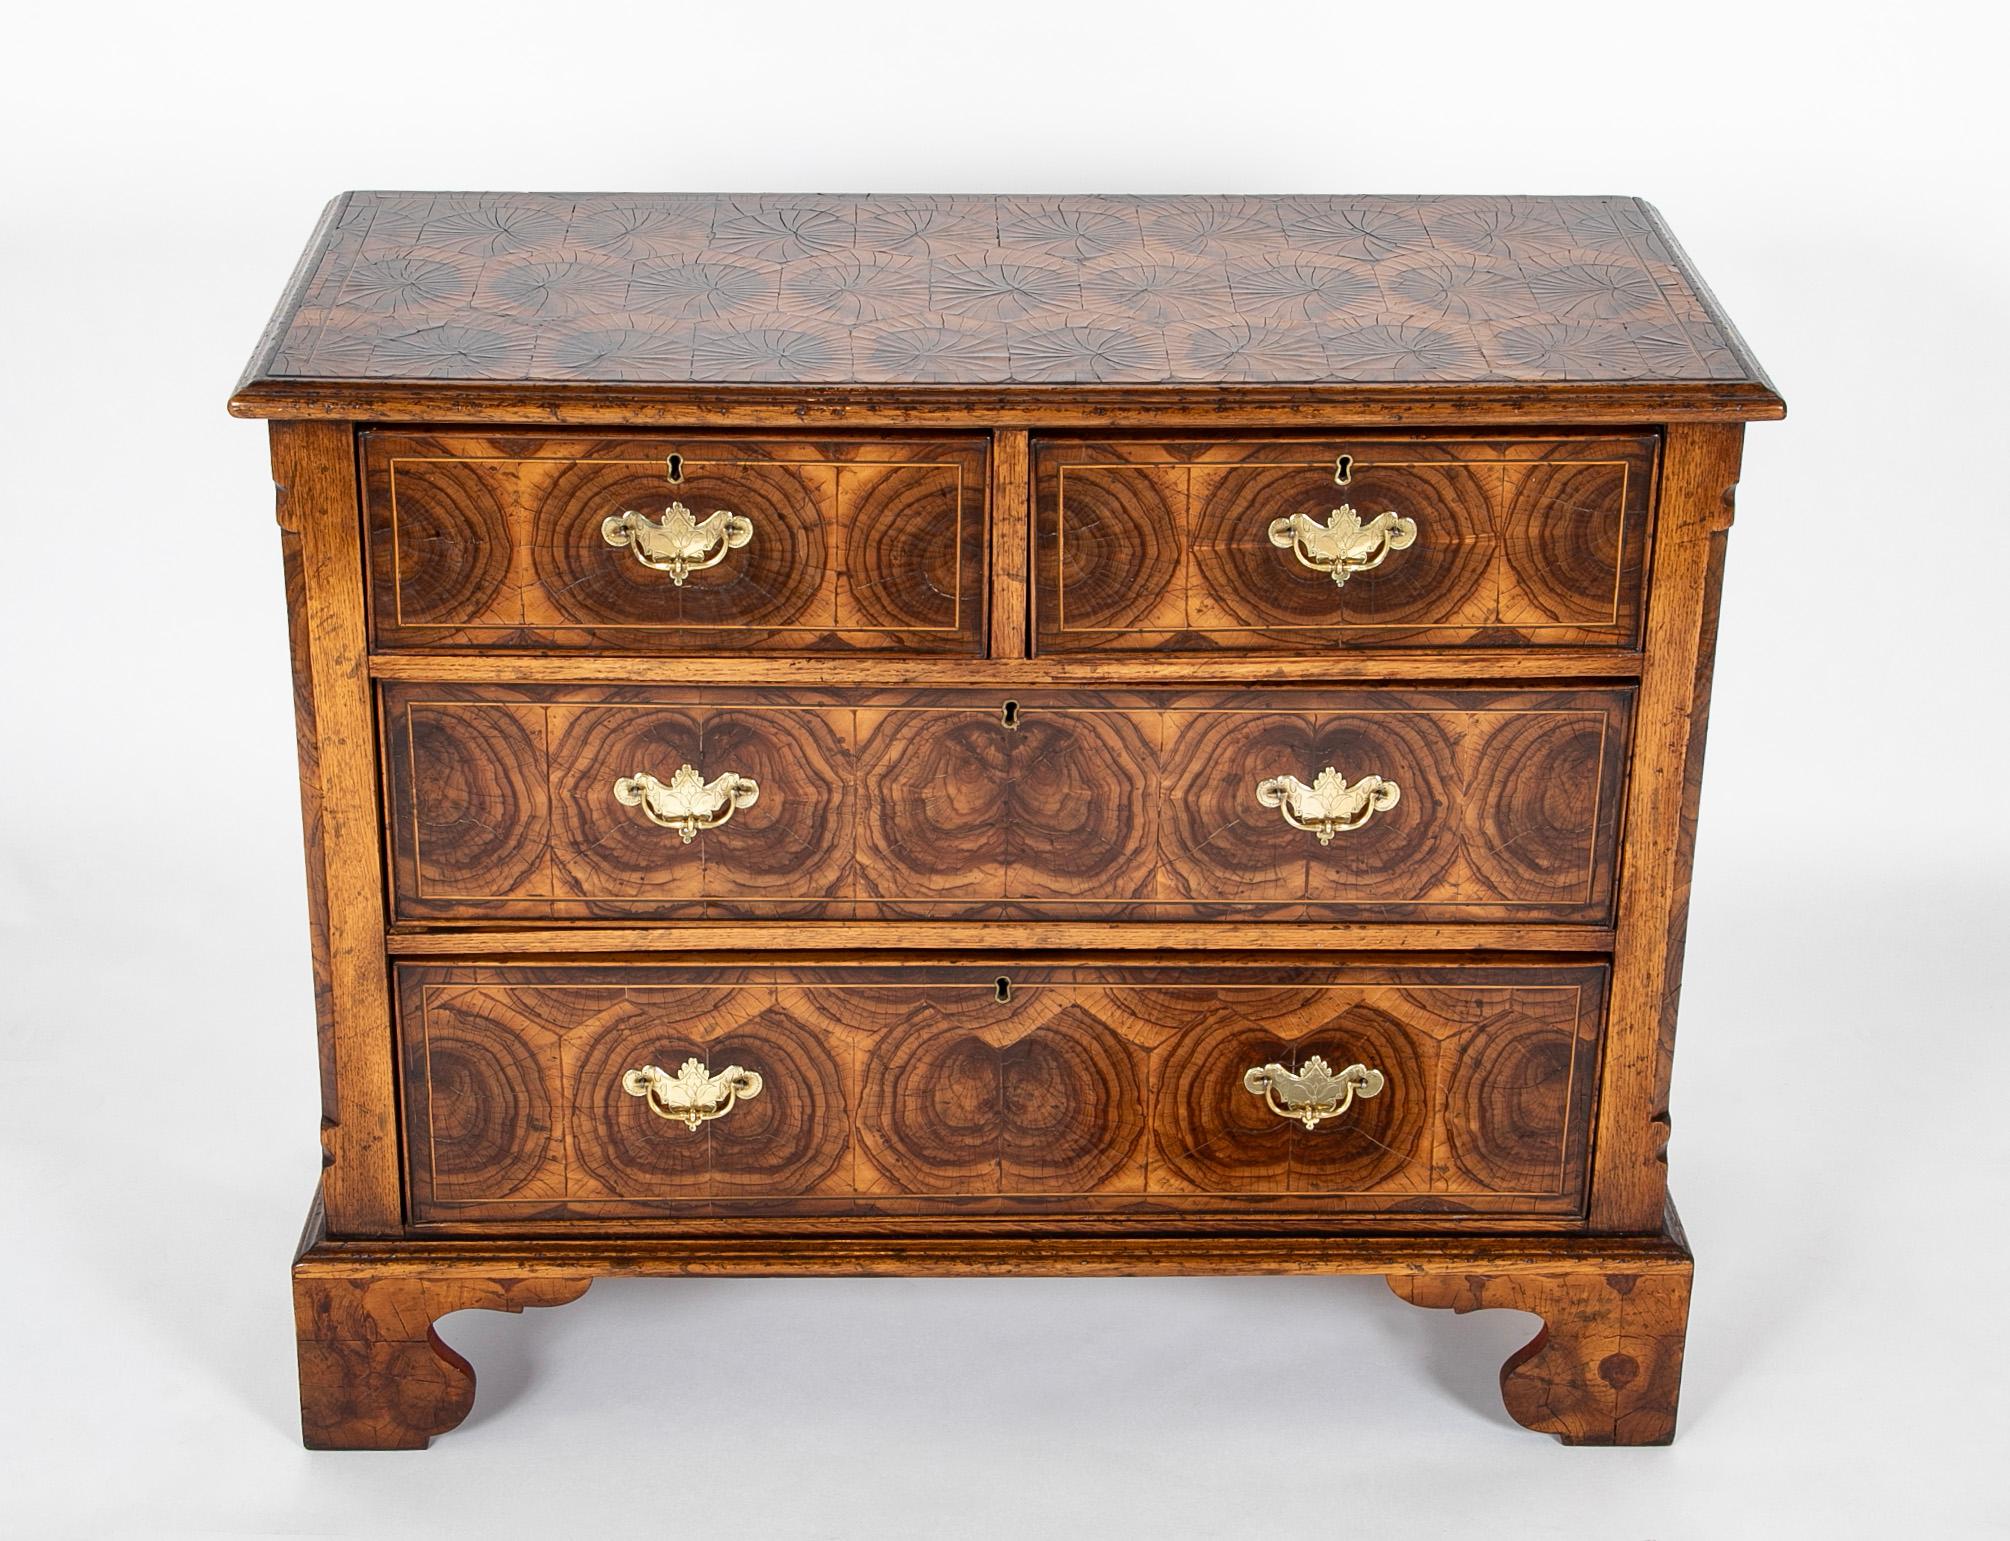 A wonderful medium scale four drawer commode with very handsome oyster veneer in the Chippendale style. The drawers with etched brass pulls. This piece was created by an master craftsman, you would only know it wasn't period by examining the